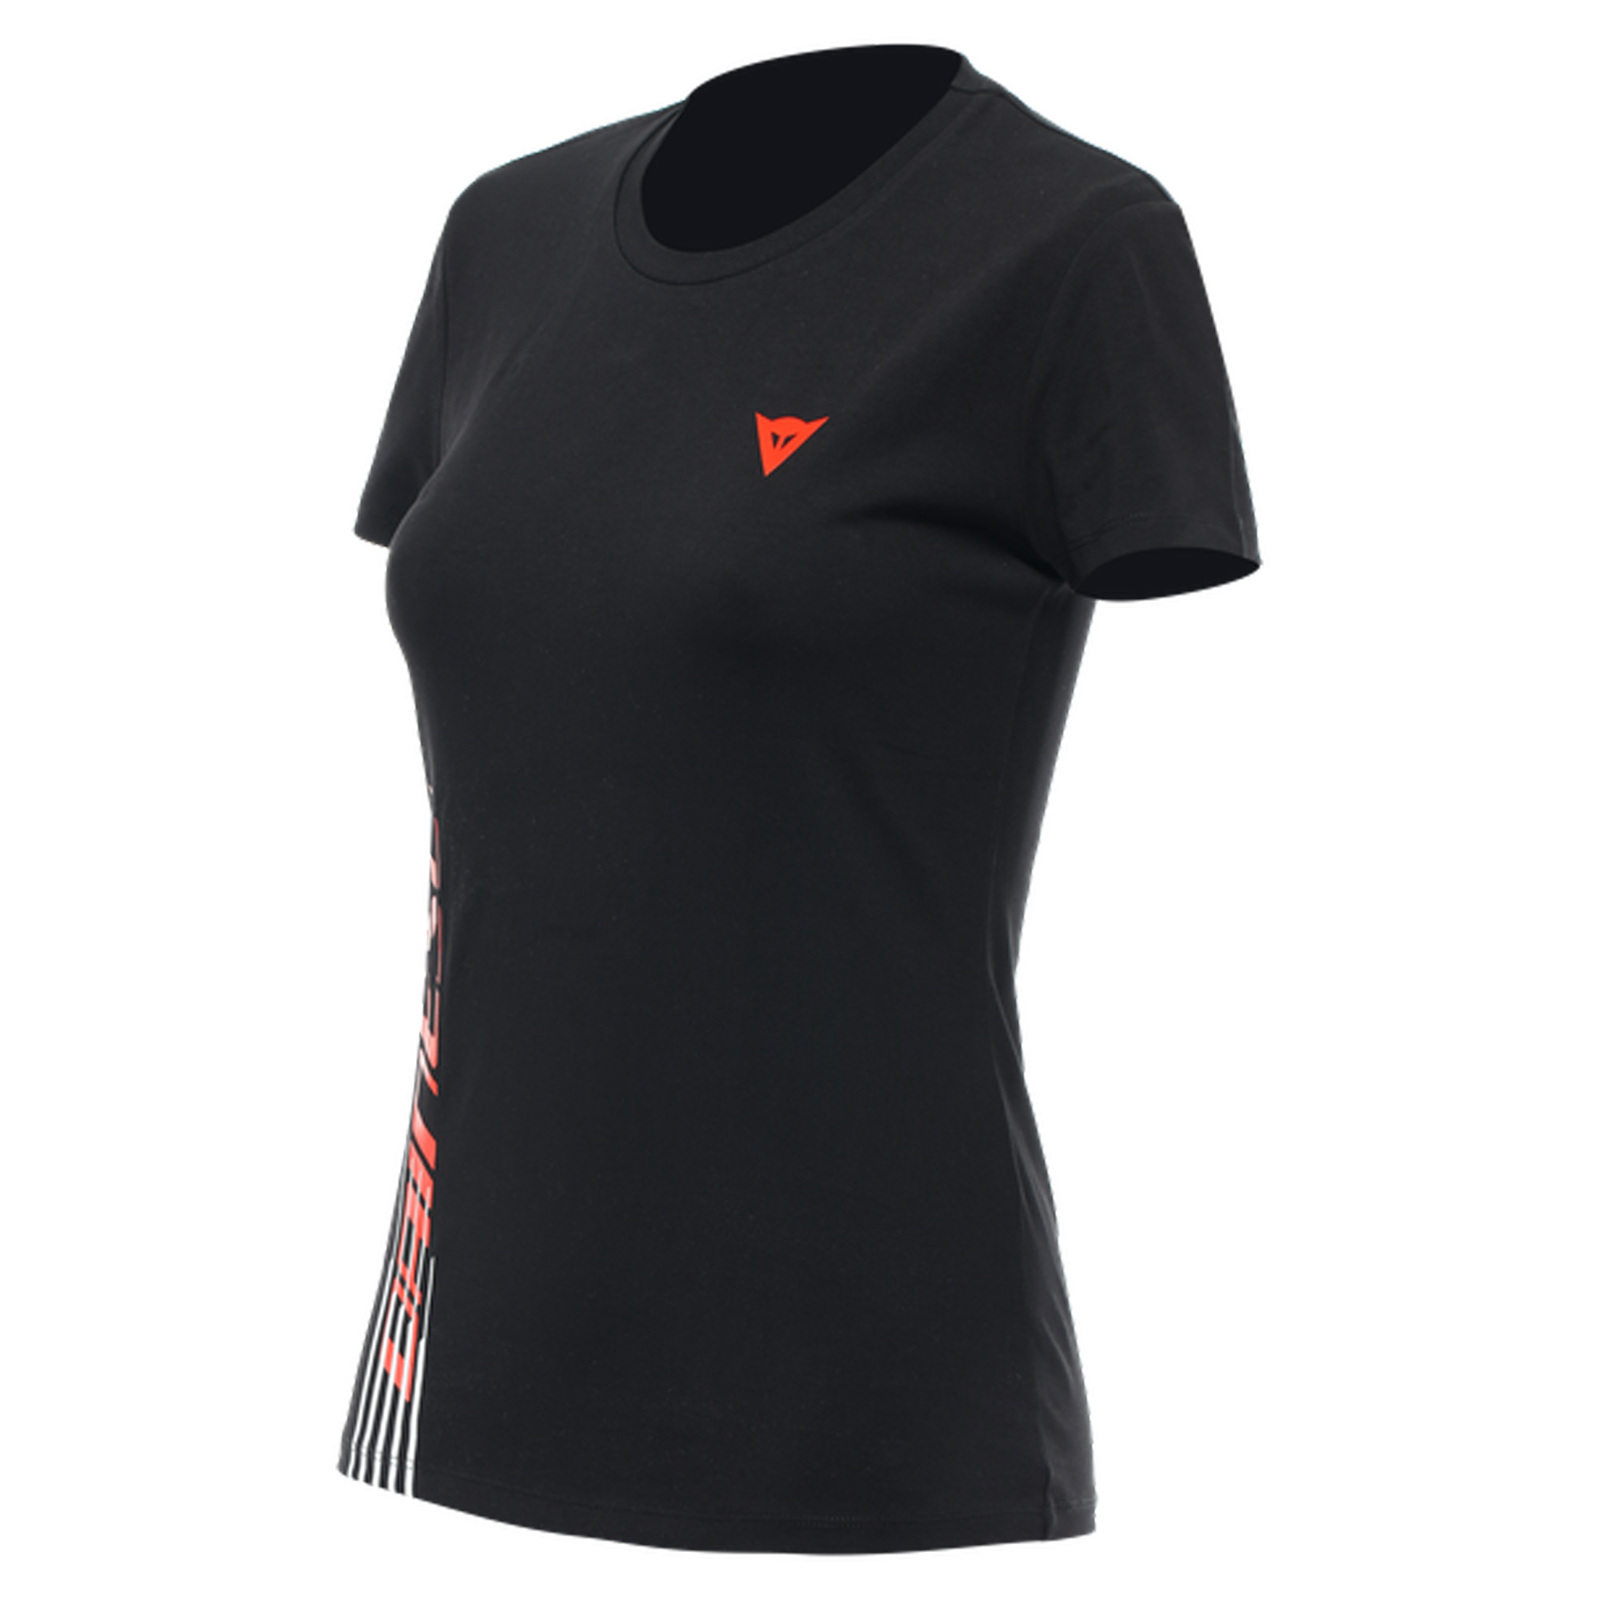 DAINESE CASUAL LOGO LADY T-SHIRT BLK/FLUO-RED/XS